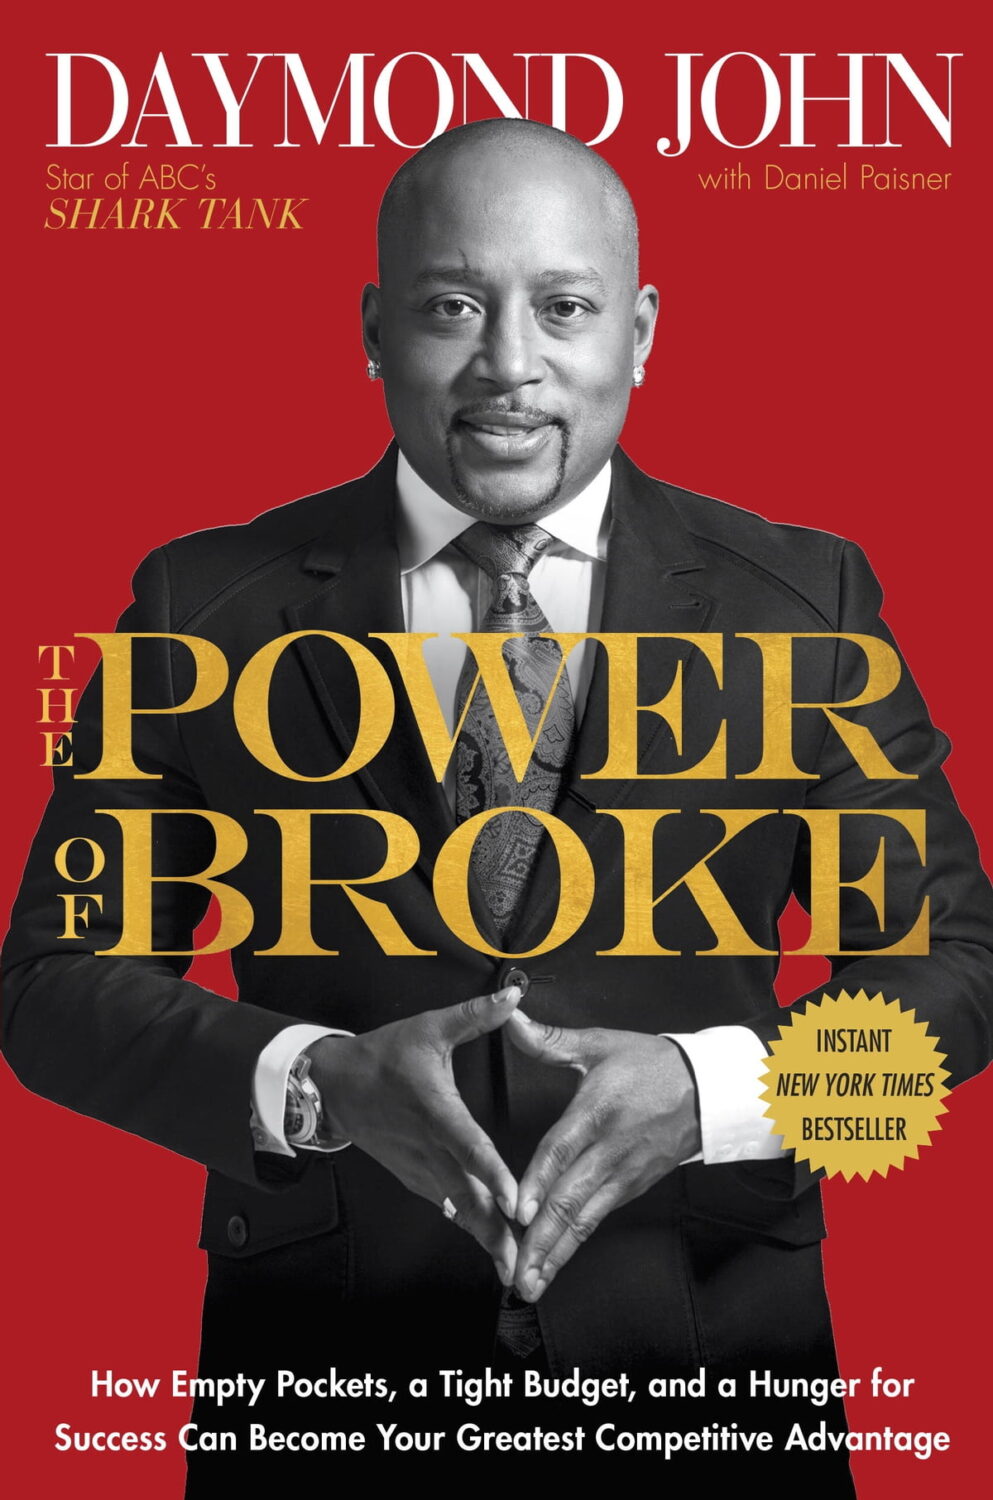 Logo de la startup The Power of Broke: How Empty Pockets, a Tight Budget, and a Hunger for Success Can Become Your Greatest Competitive Advantage